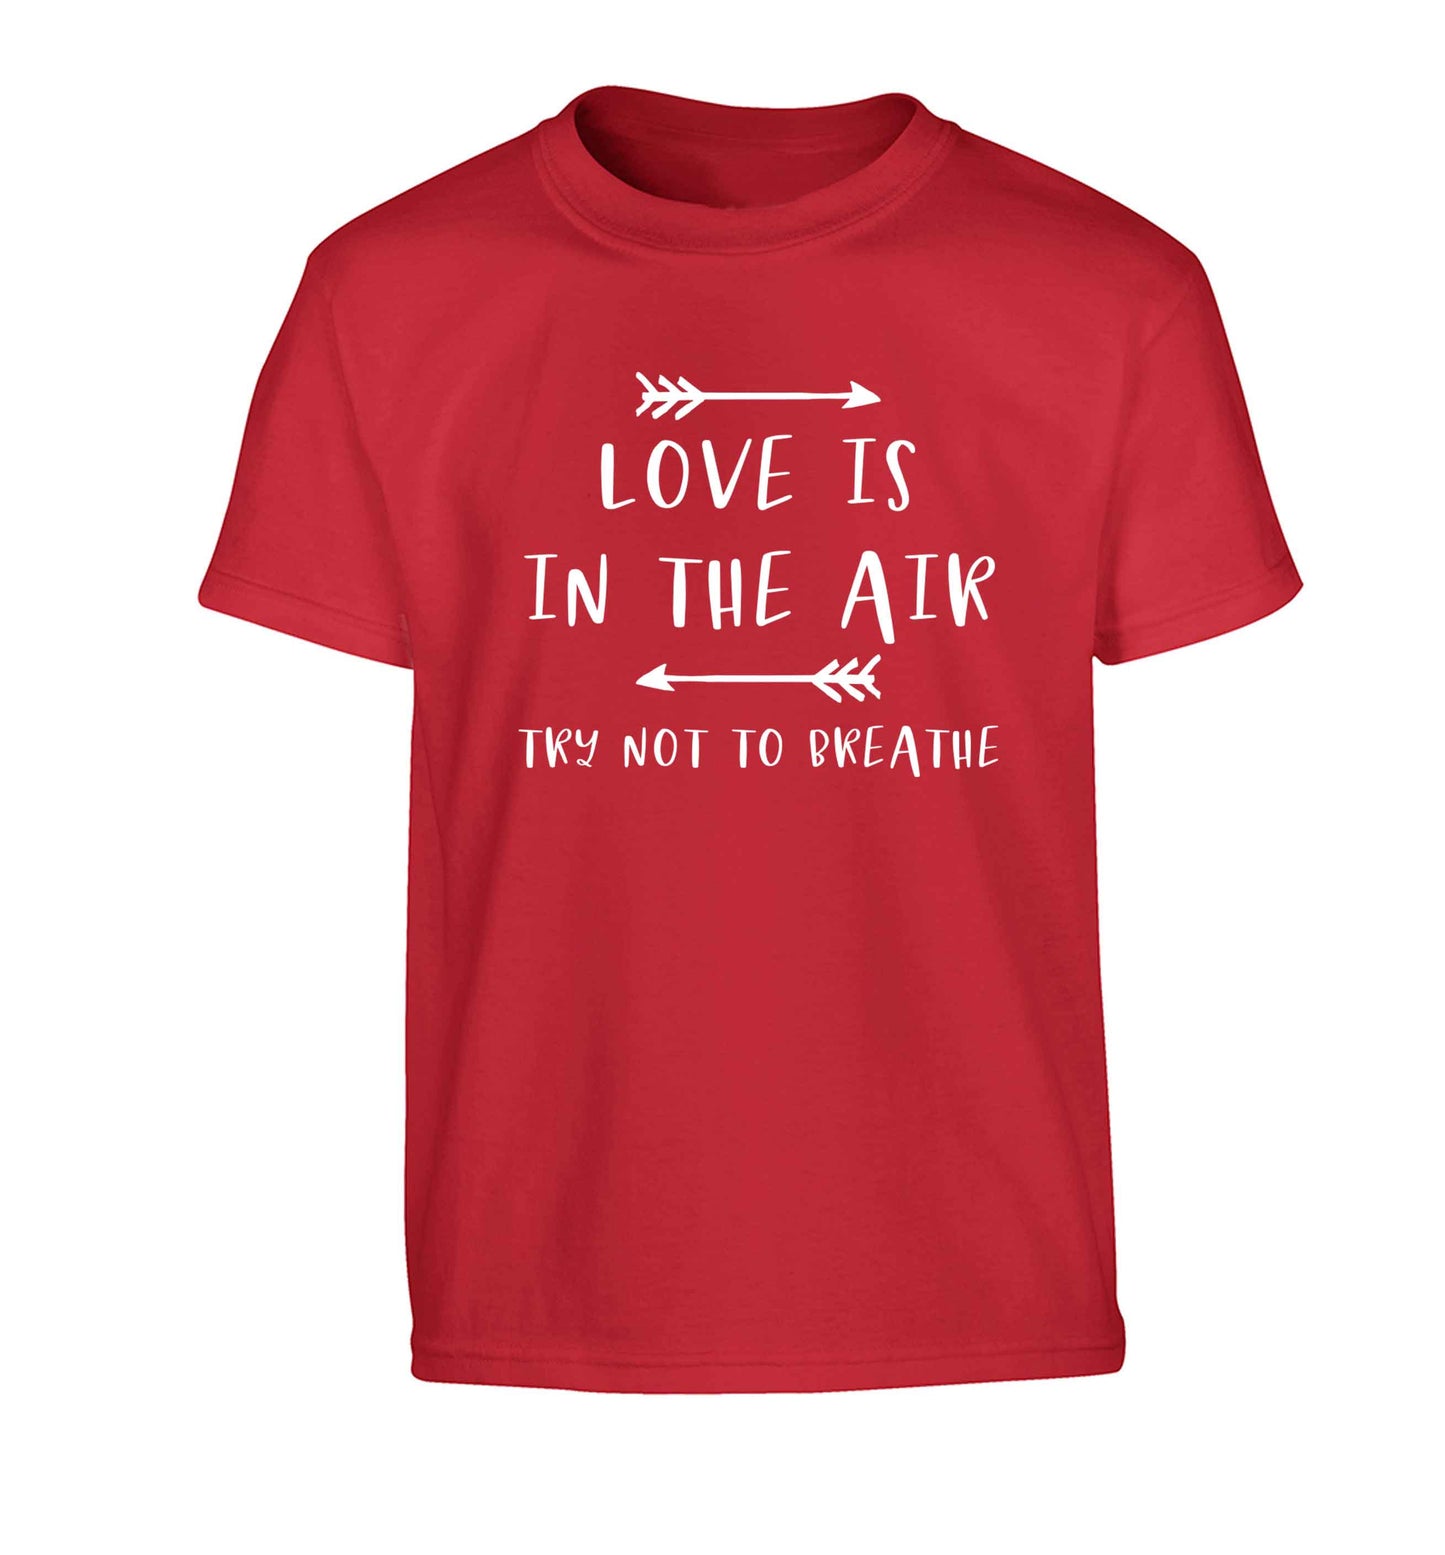 Love is in the air try not to breathe Children's red Tshirt 12-13 Years